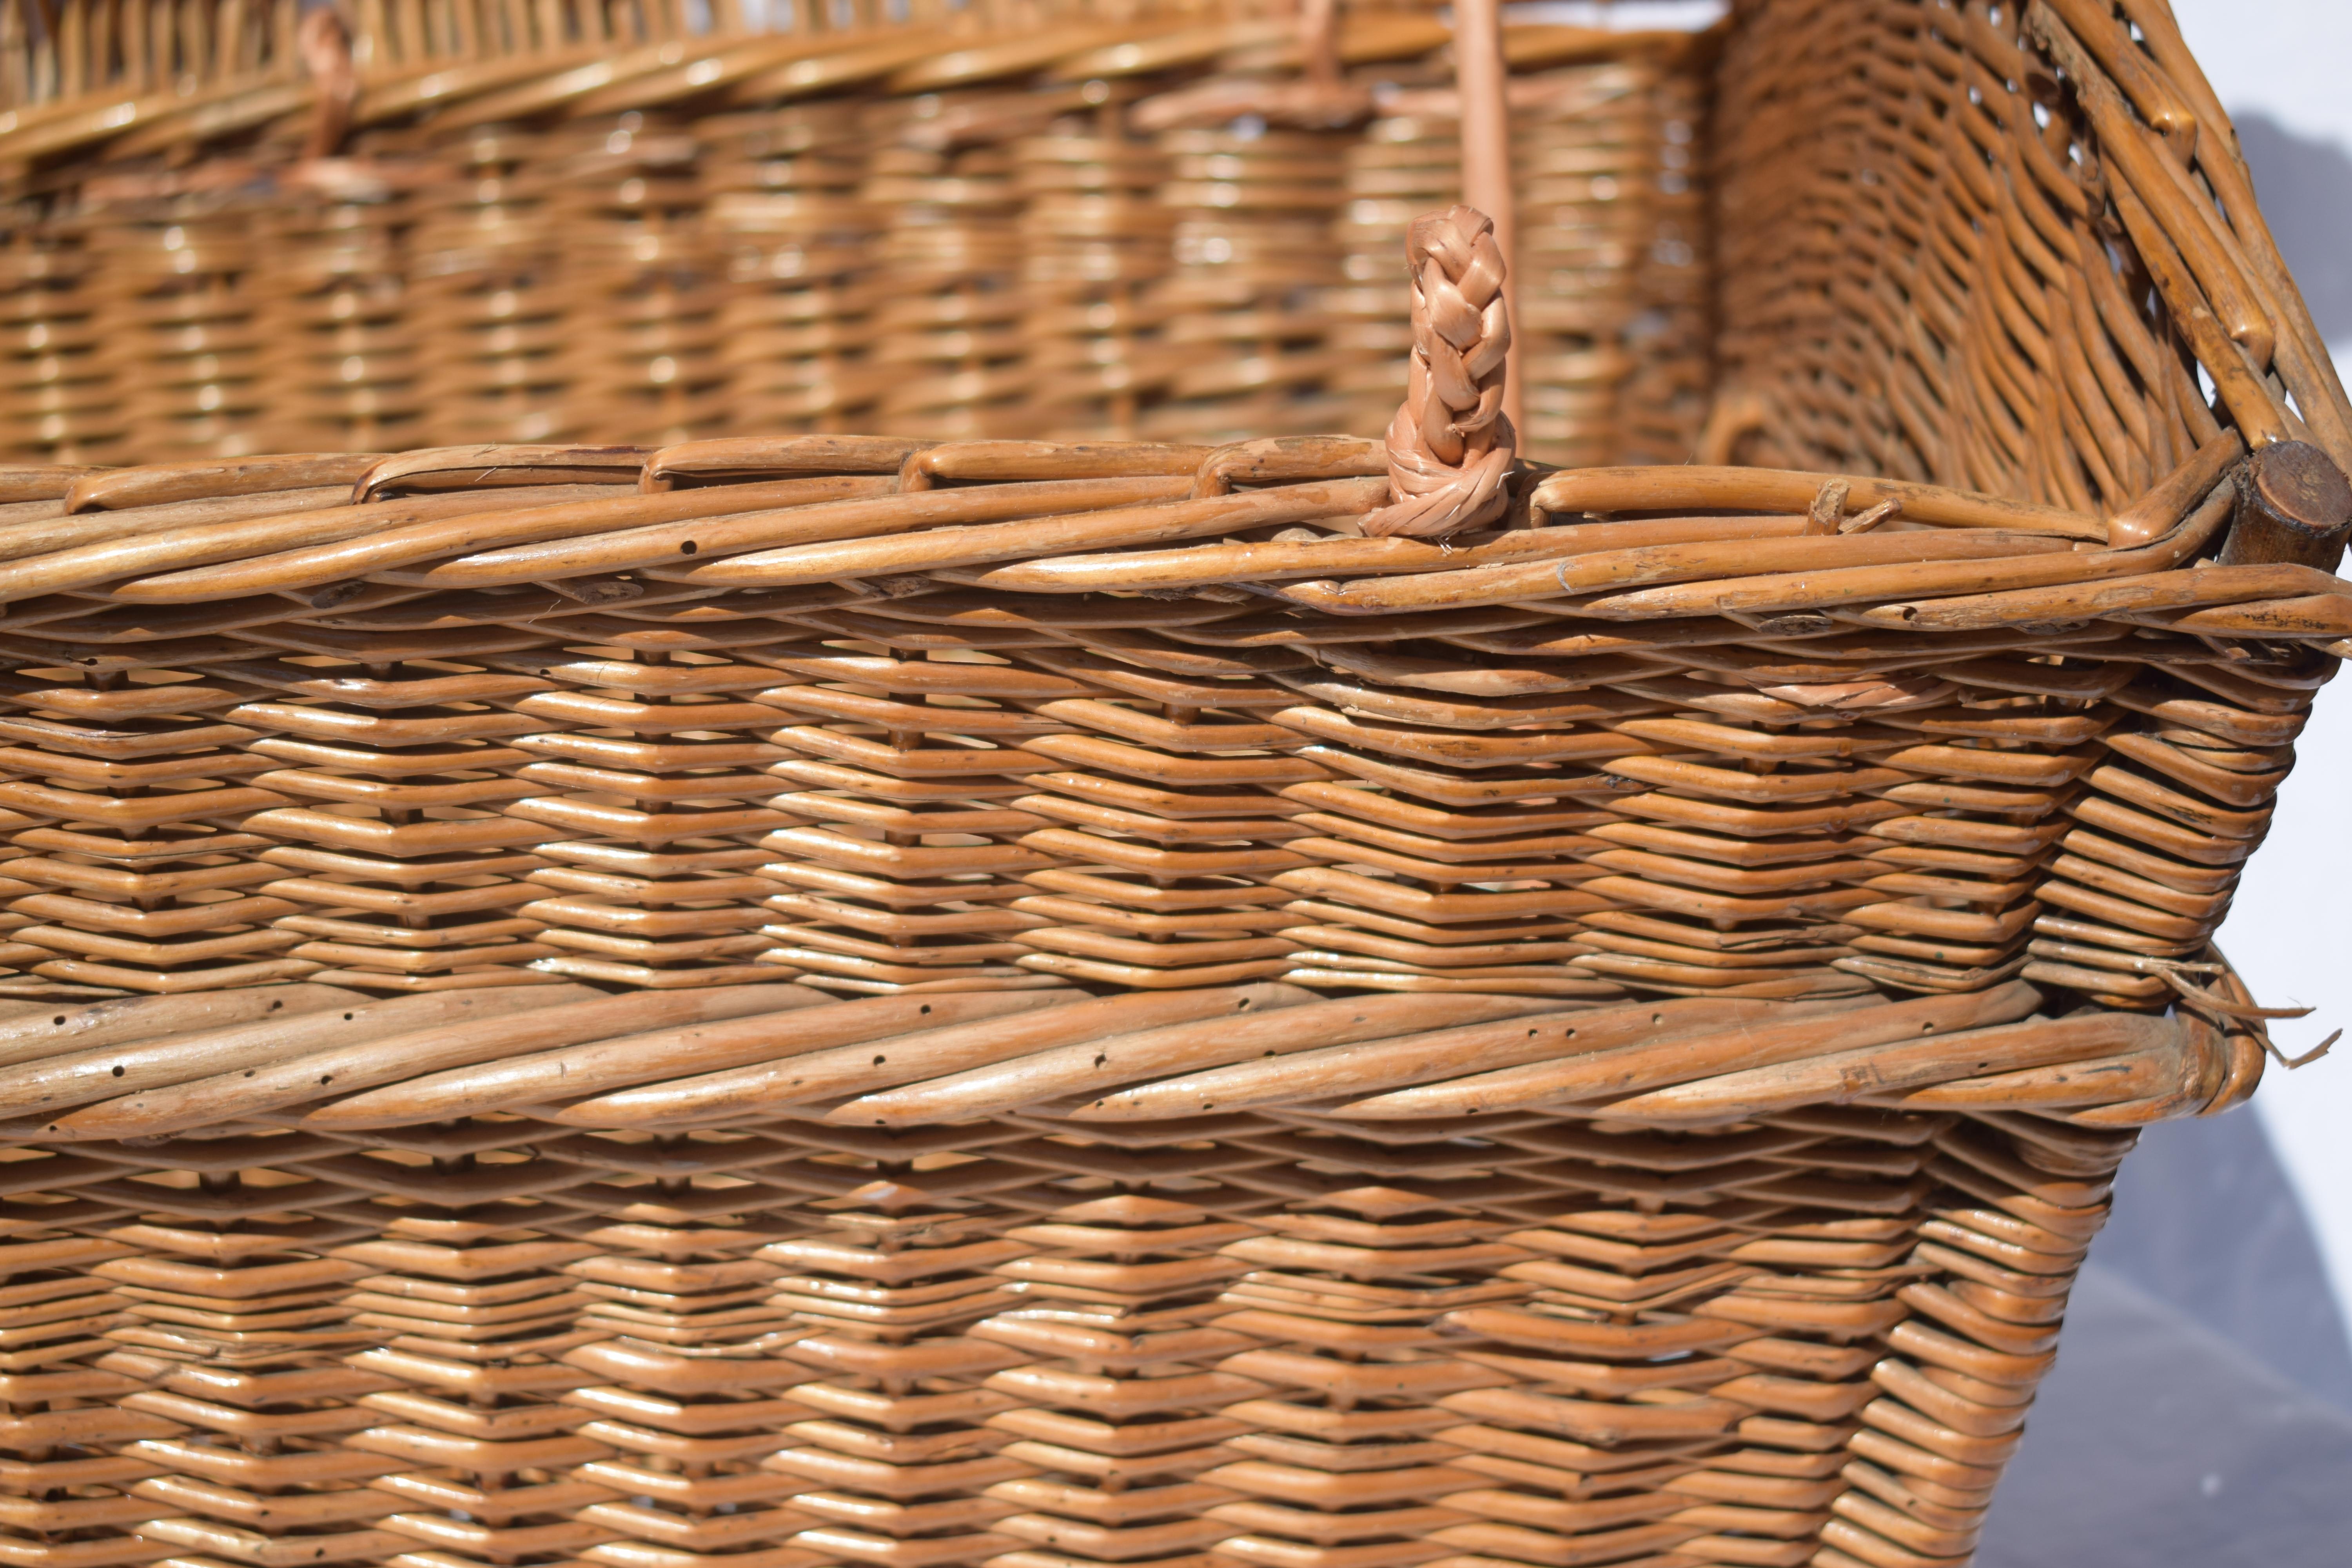 Large 19th Century French Wicker Basket with Lid 6